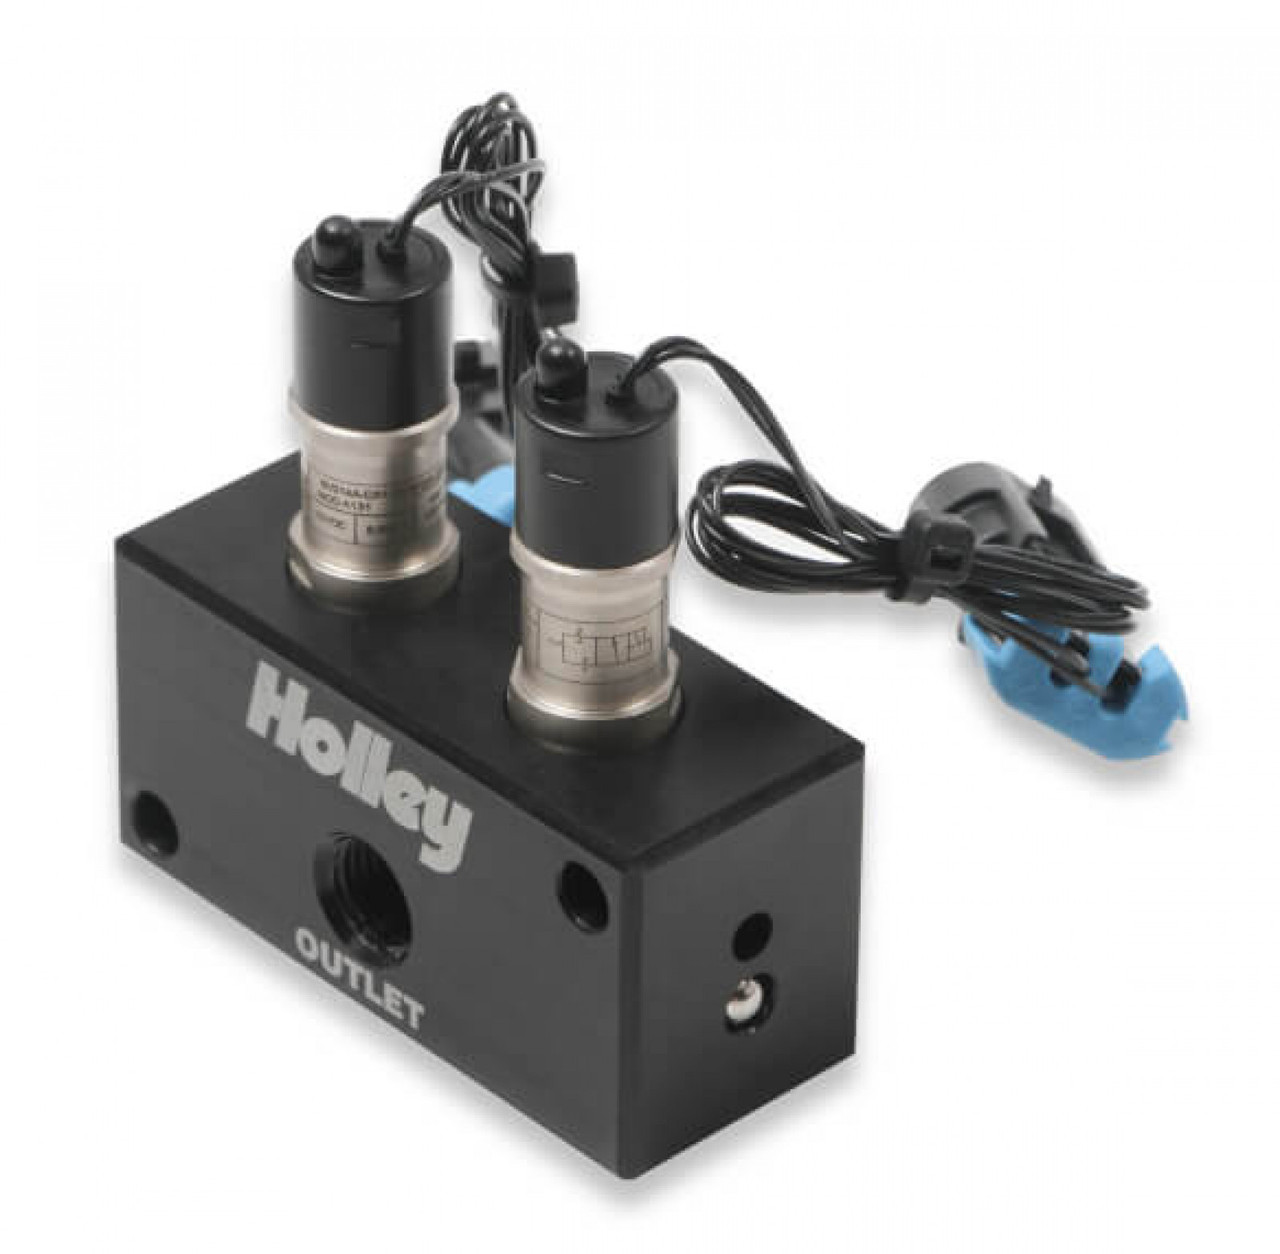 Holley EFI High Flow Dual Solenoid Boost Control Kit (HOE-1557-201)